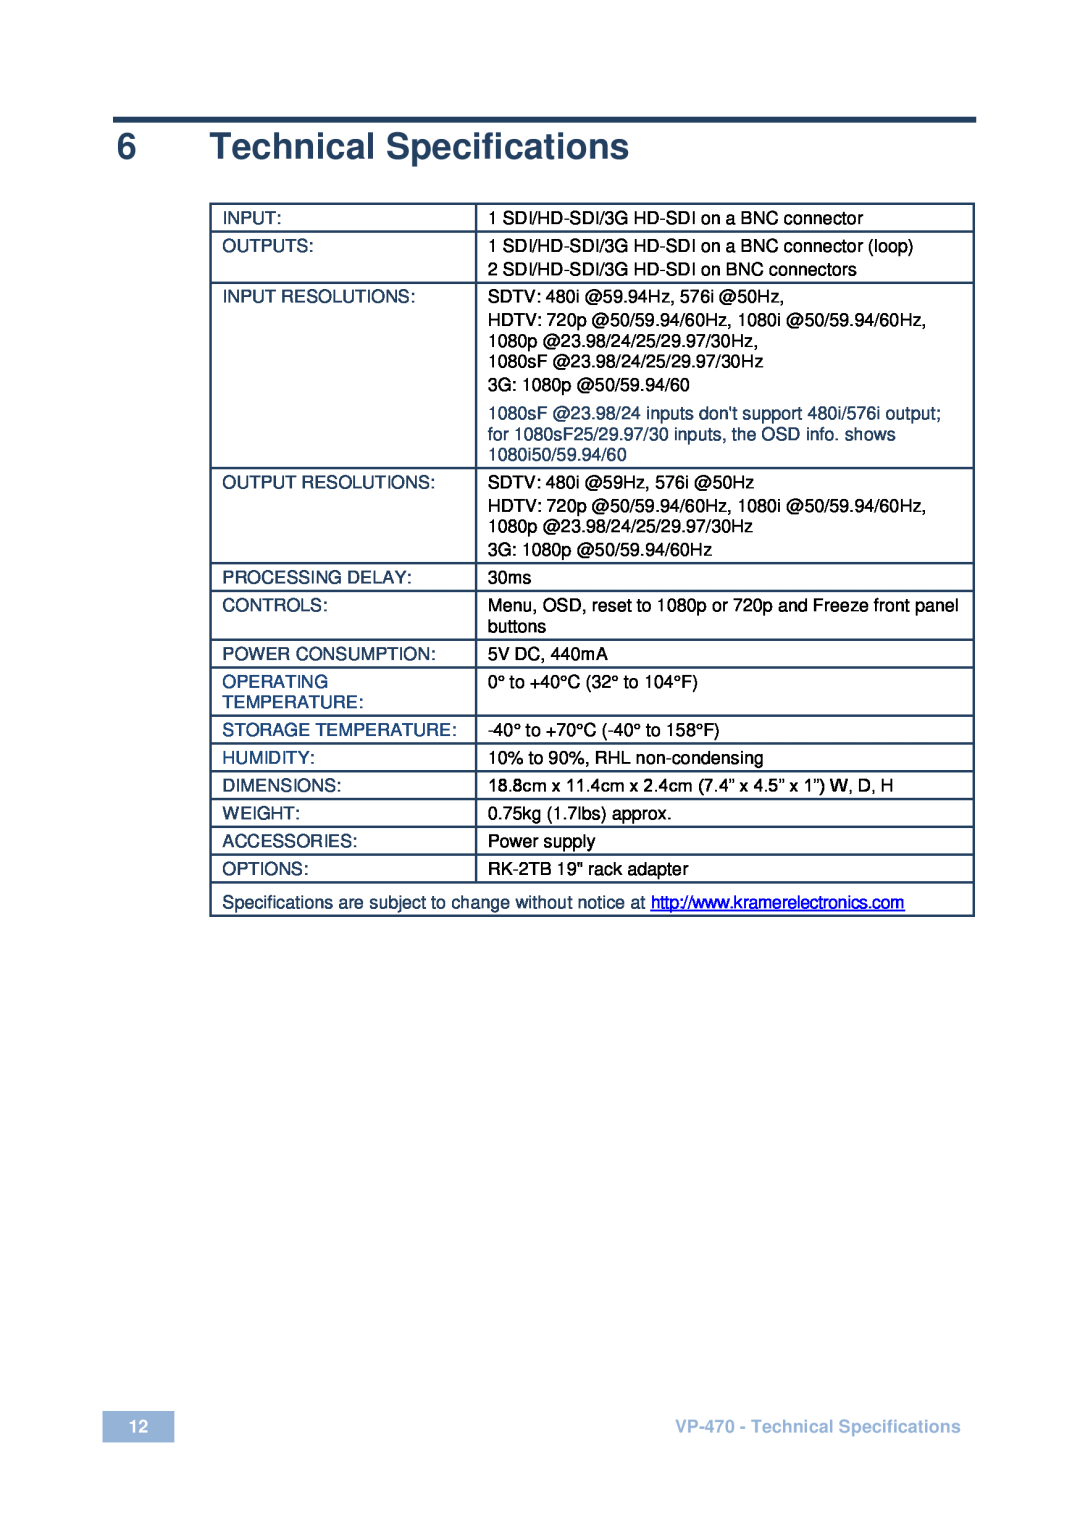 Kramer Electronics VP-470 user manual Technical Specifications, Operating, Storage Temperature, Humidity 